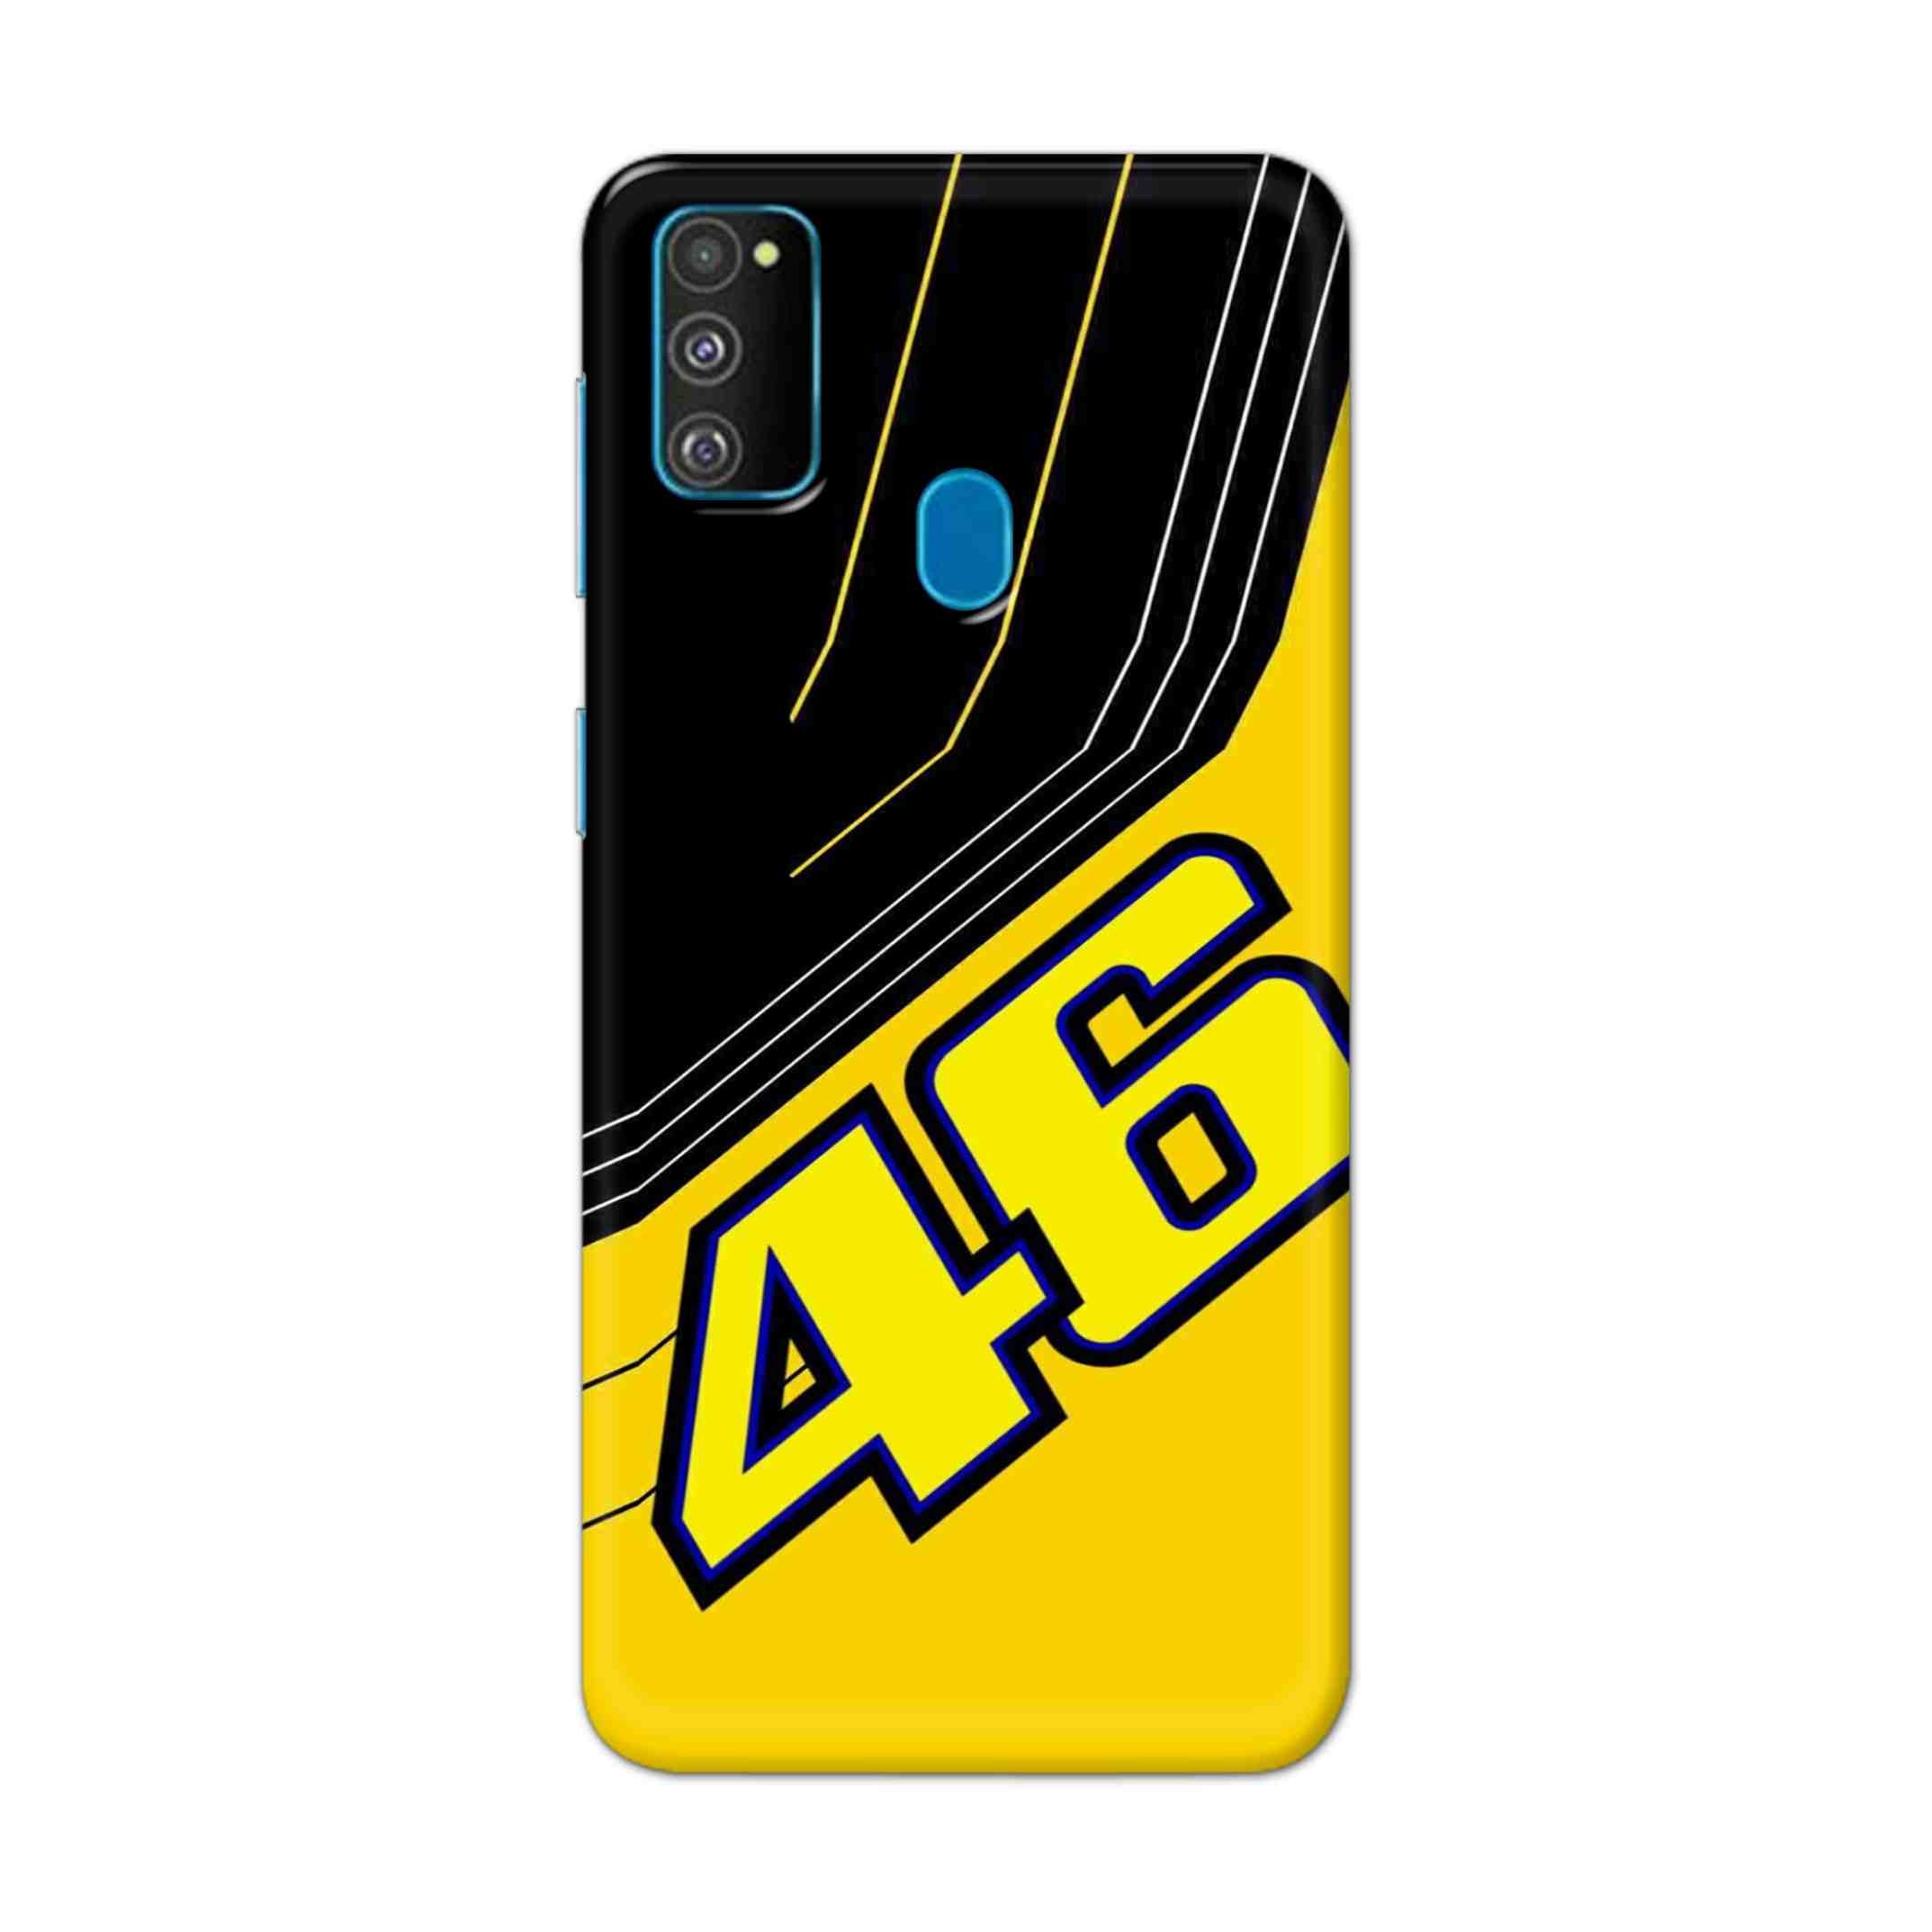 Buy 46 Hard Back Mobile Phone Case Cover For Samsung Galaxy M30s Online